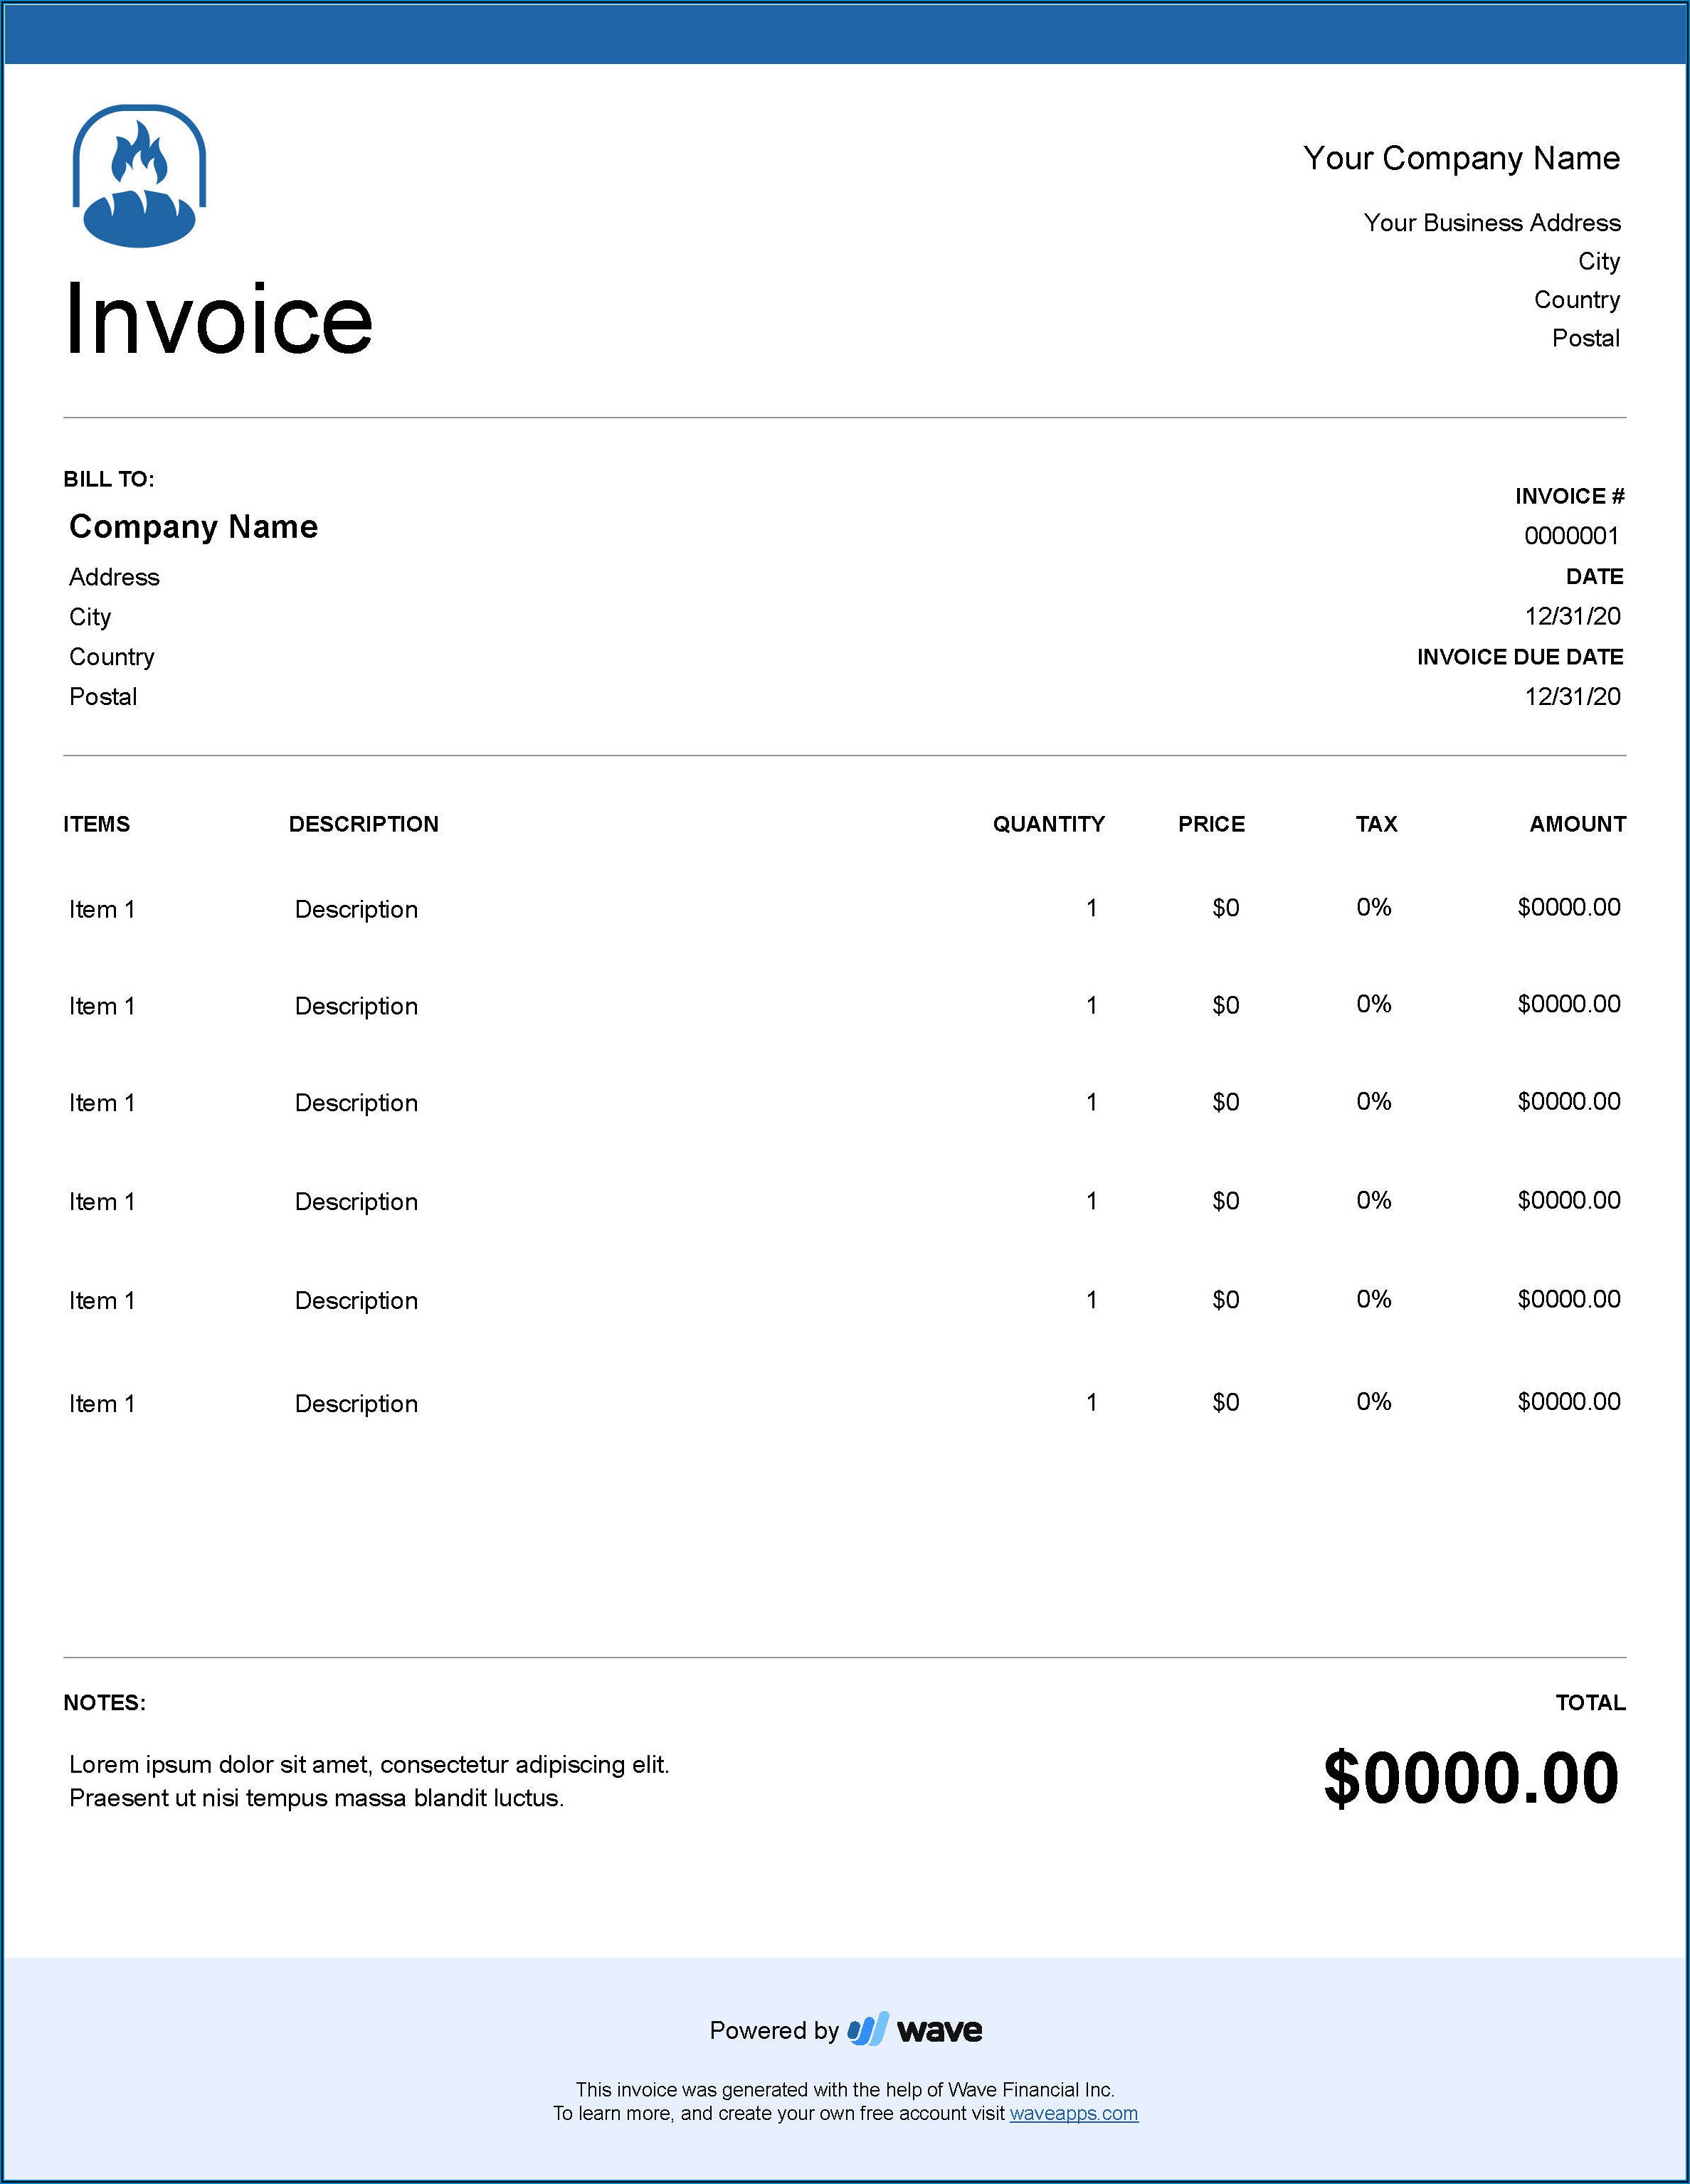 Bakery Invoice Template Free